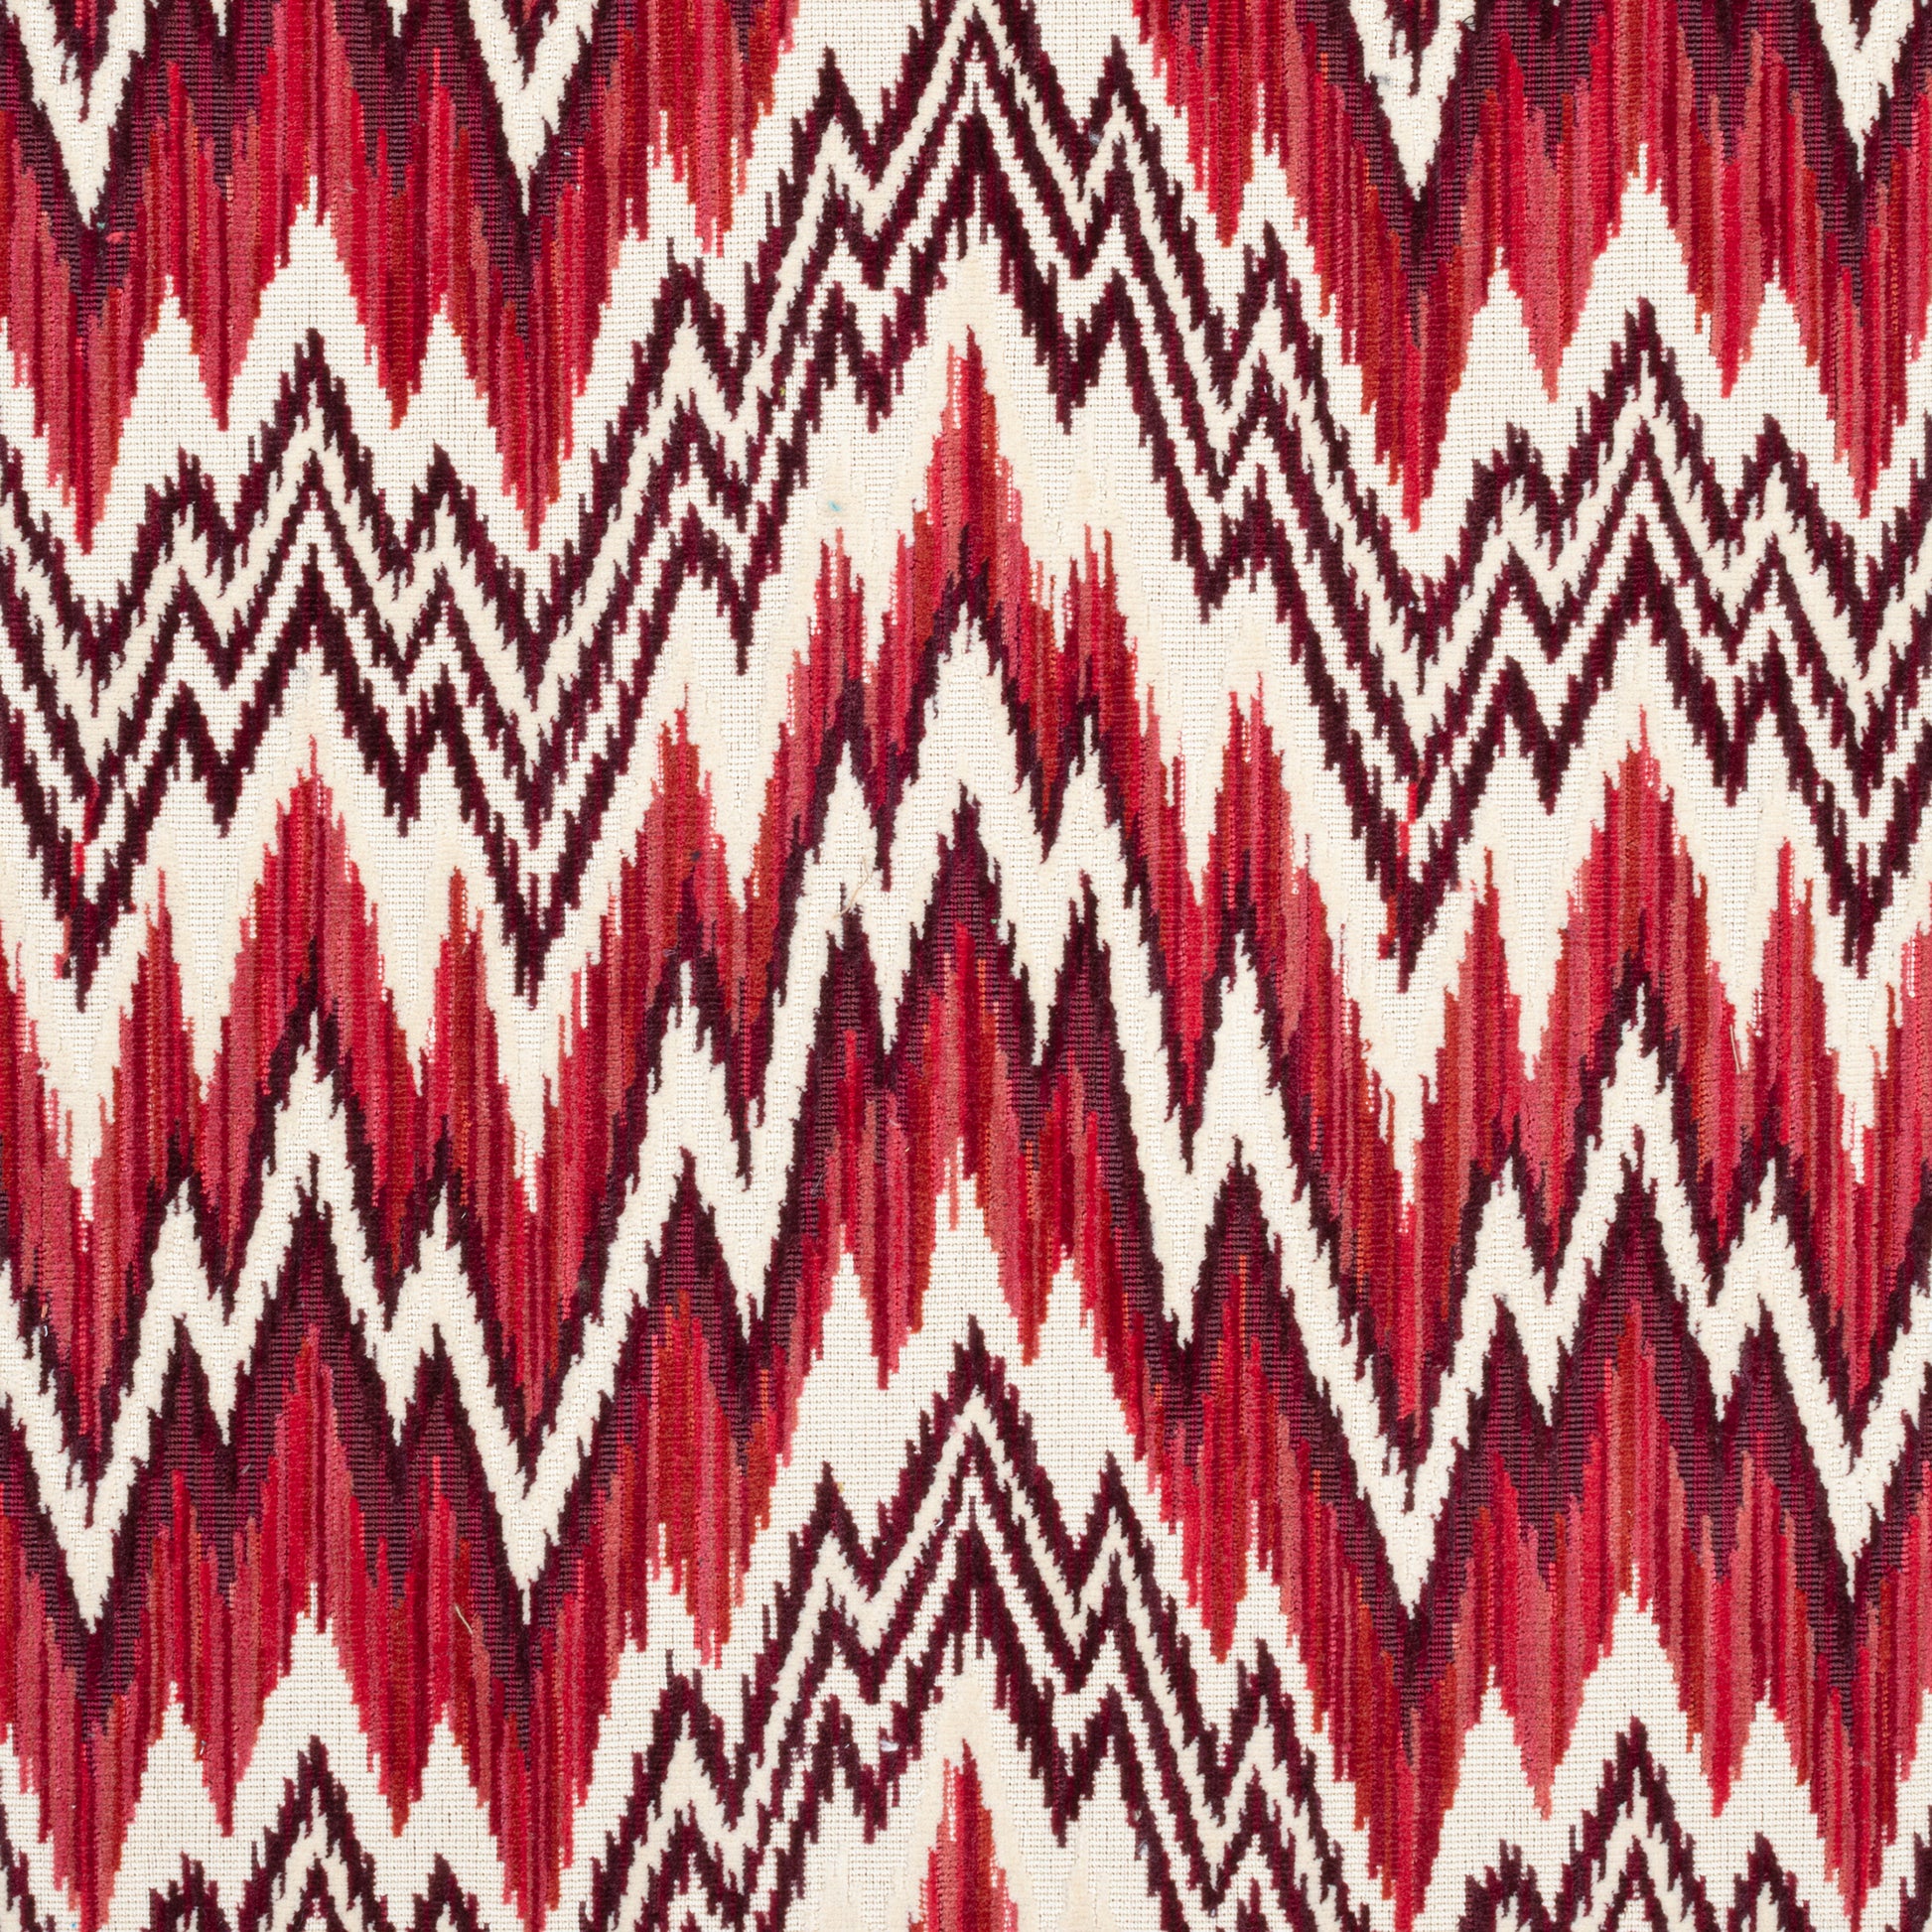 Purchase Thibaut Fabric Pattern number W72818 pattern name Rhythm Velvet color Ruby and Garnet